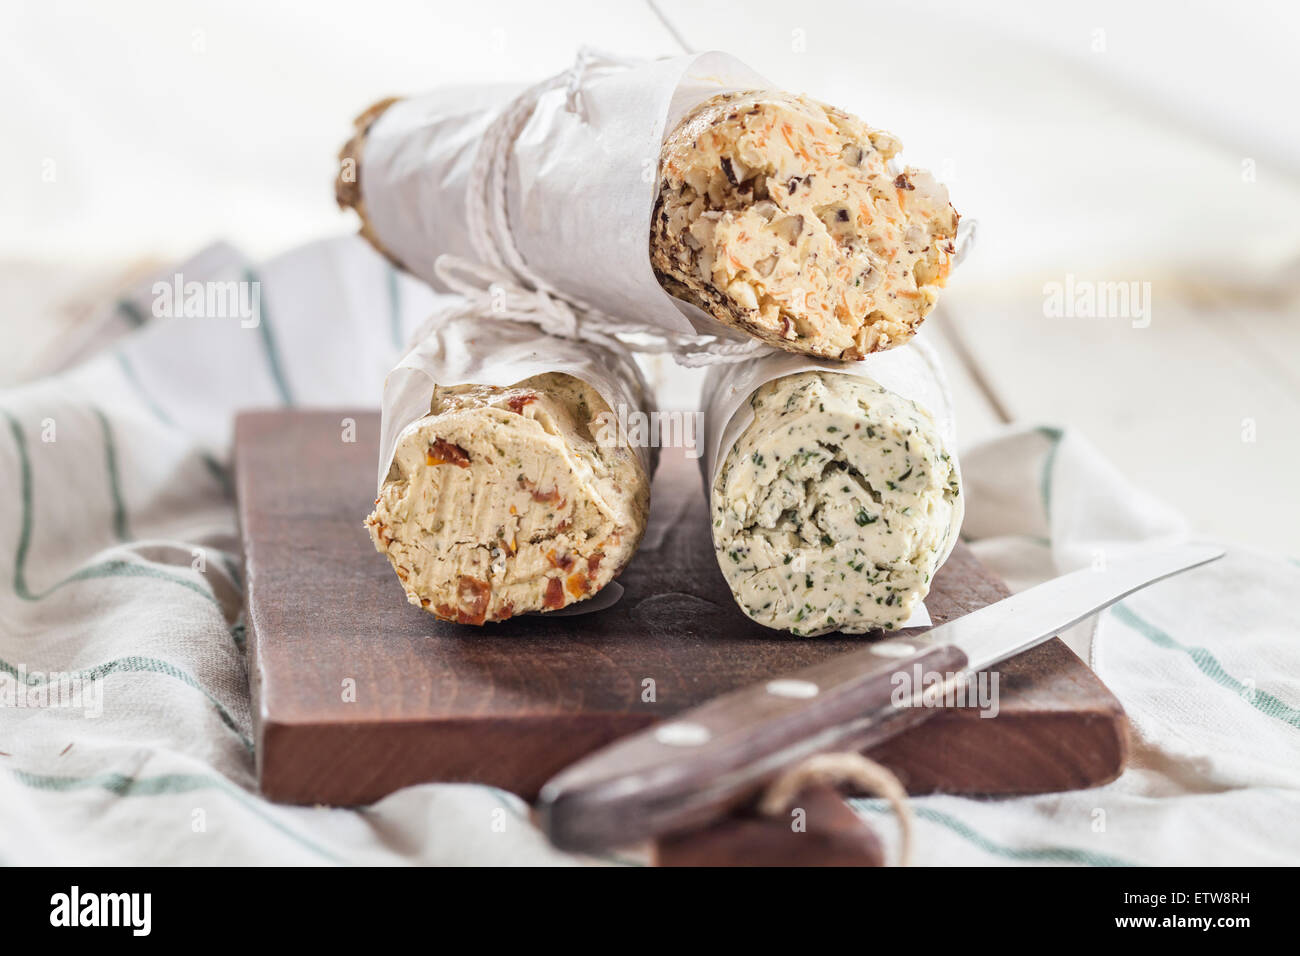 Three rolls of differently flavoured compound butters on chopping board Stock Photo